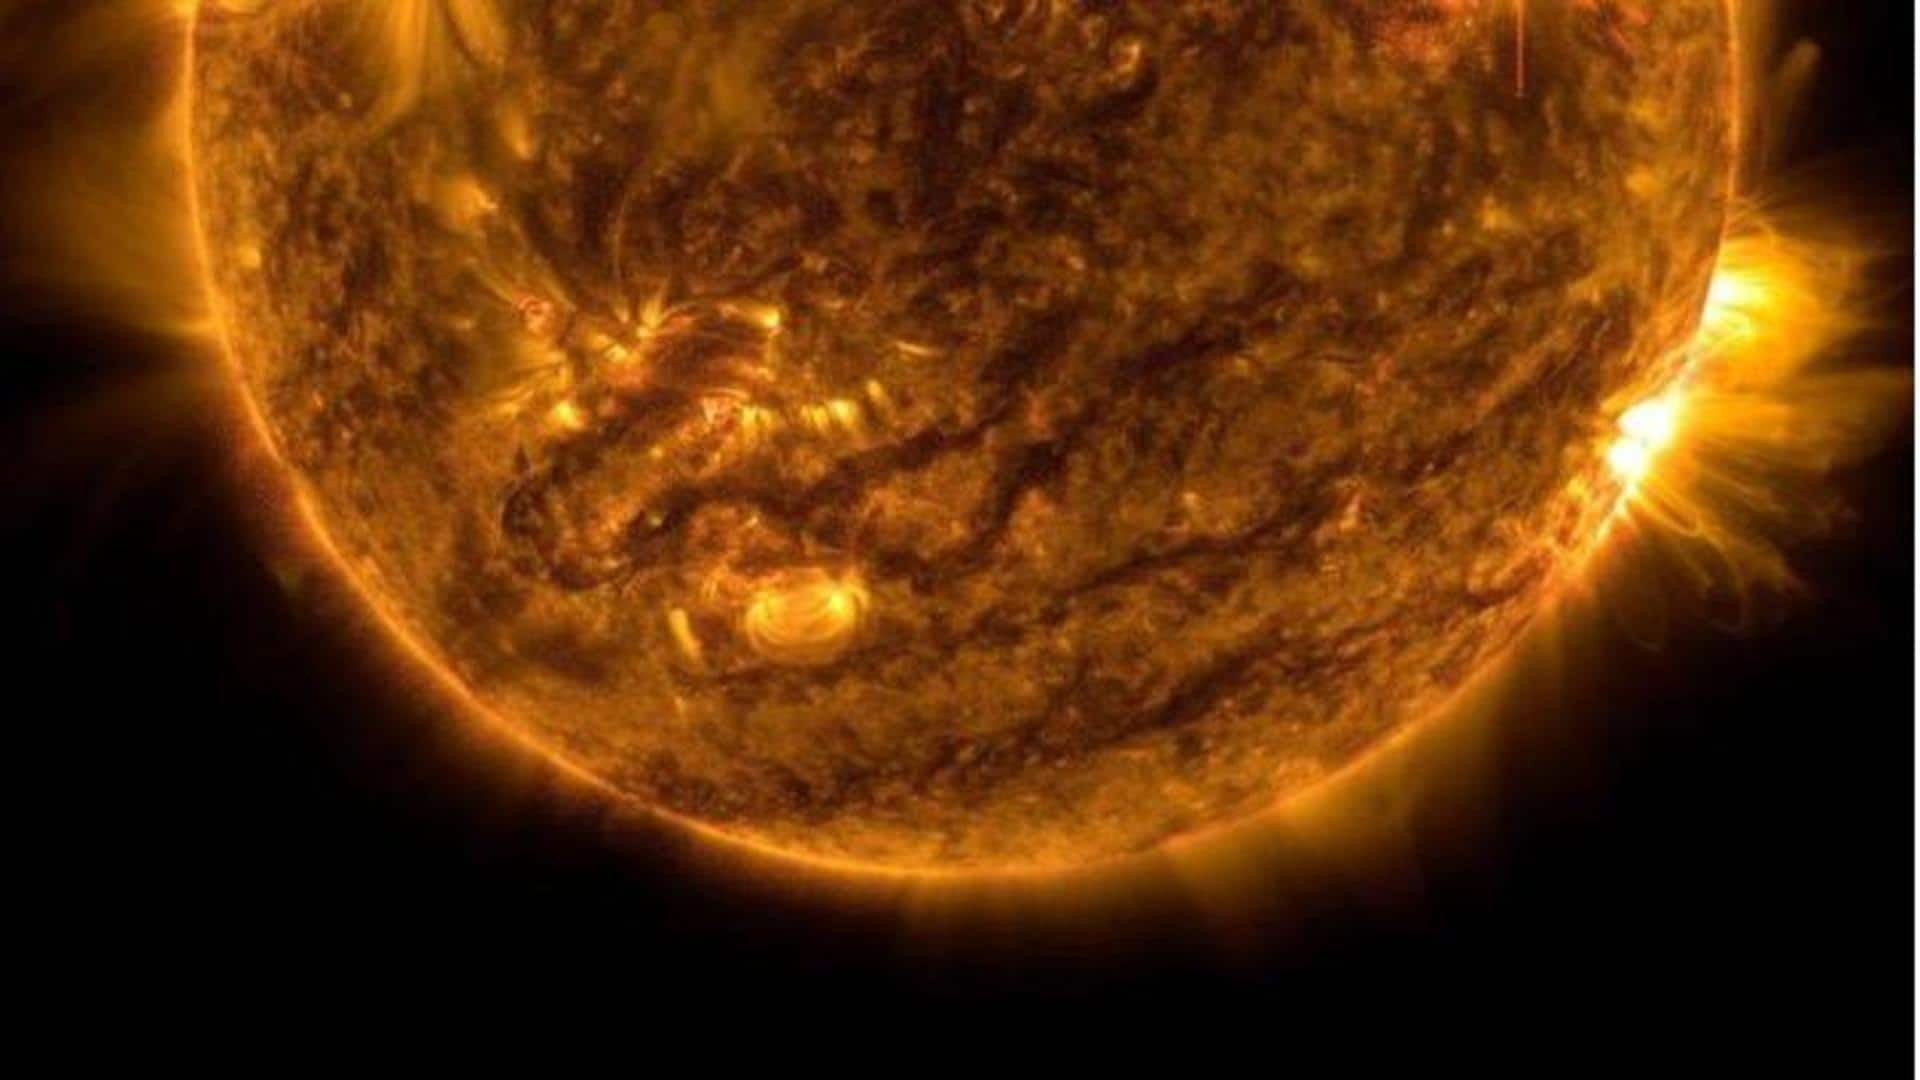 Signals from Sun could help scientists accurately predict solar flares